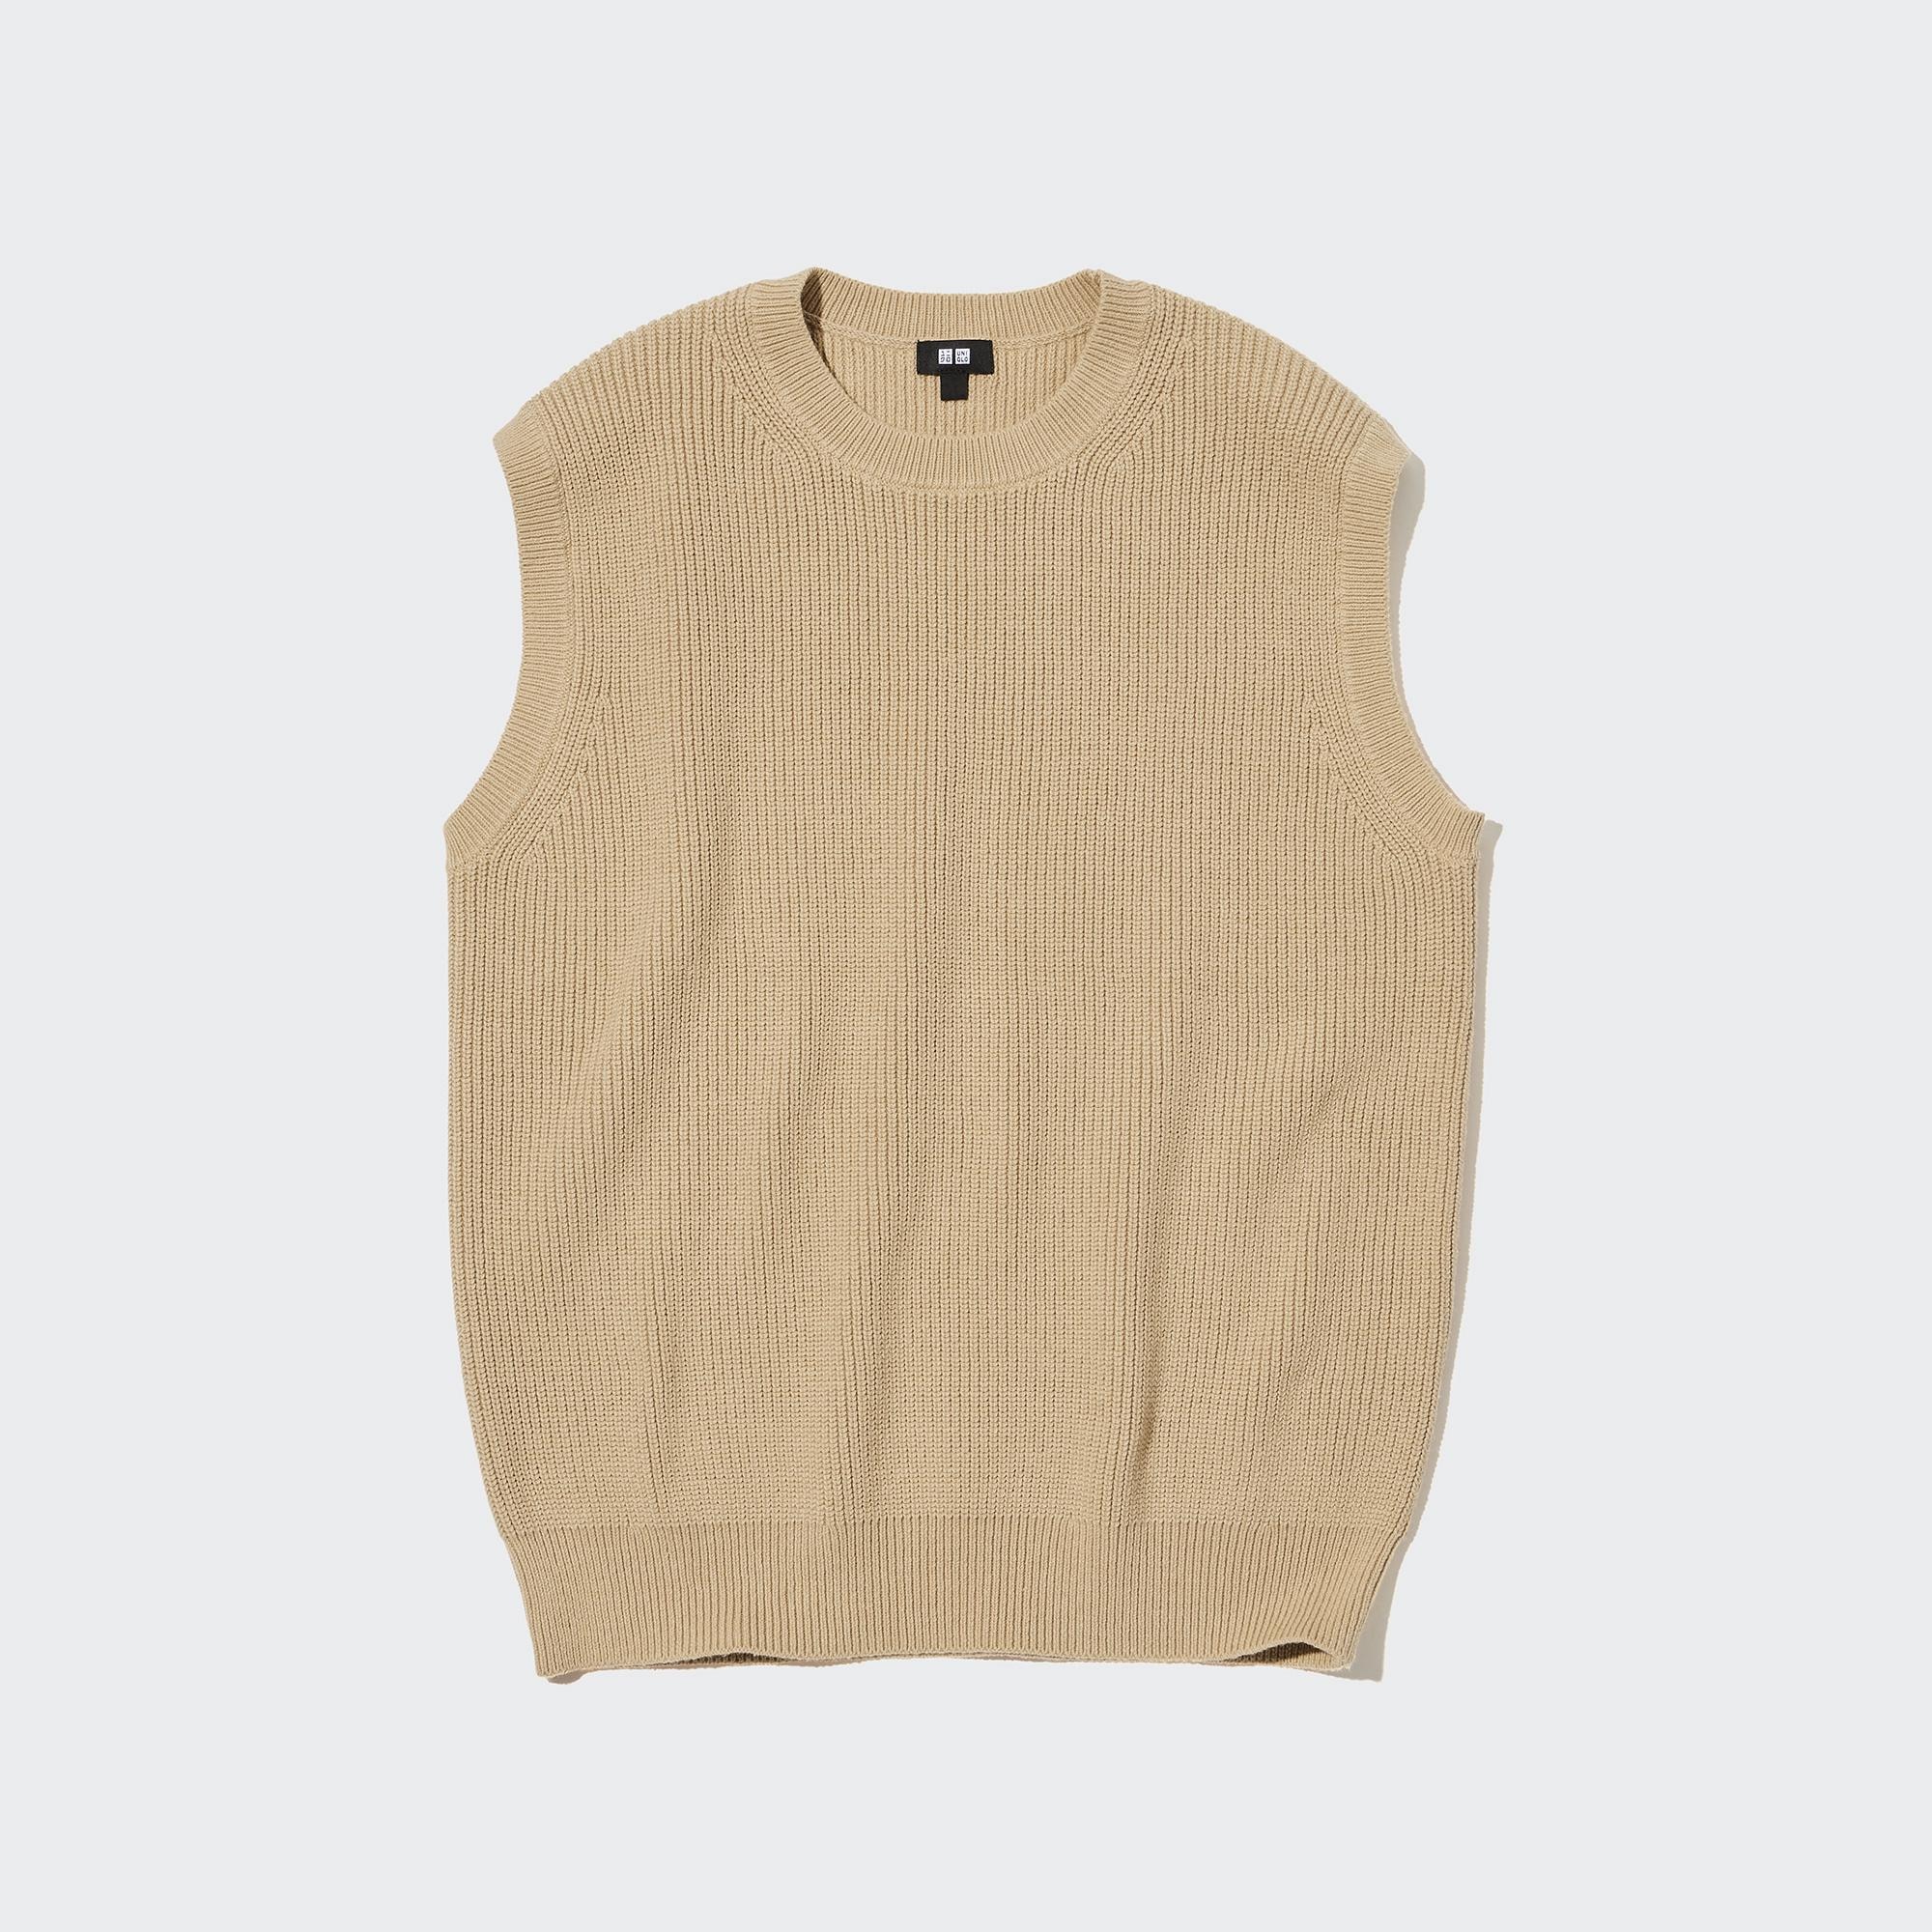 UNIQLO Middle Gauge Crew Neck Knitted Vest | StyleHint